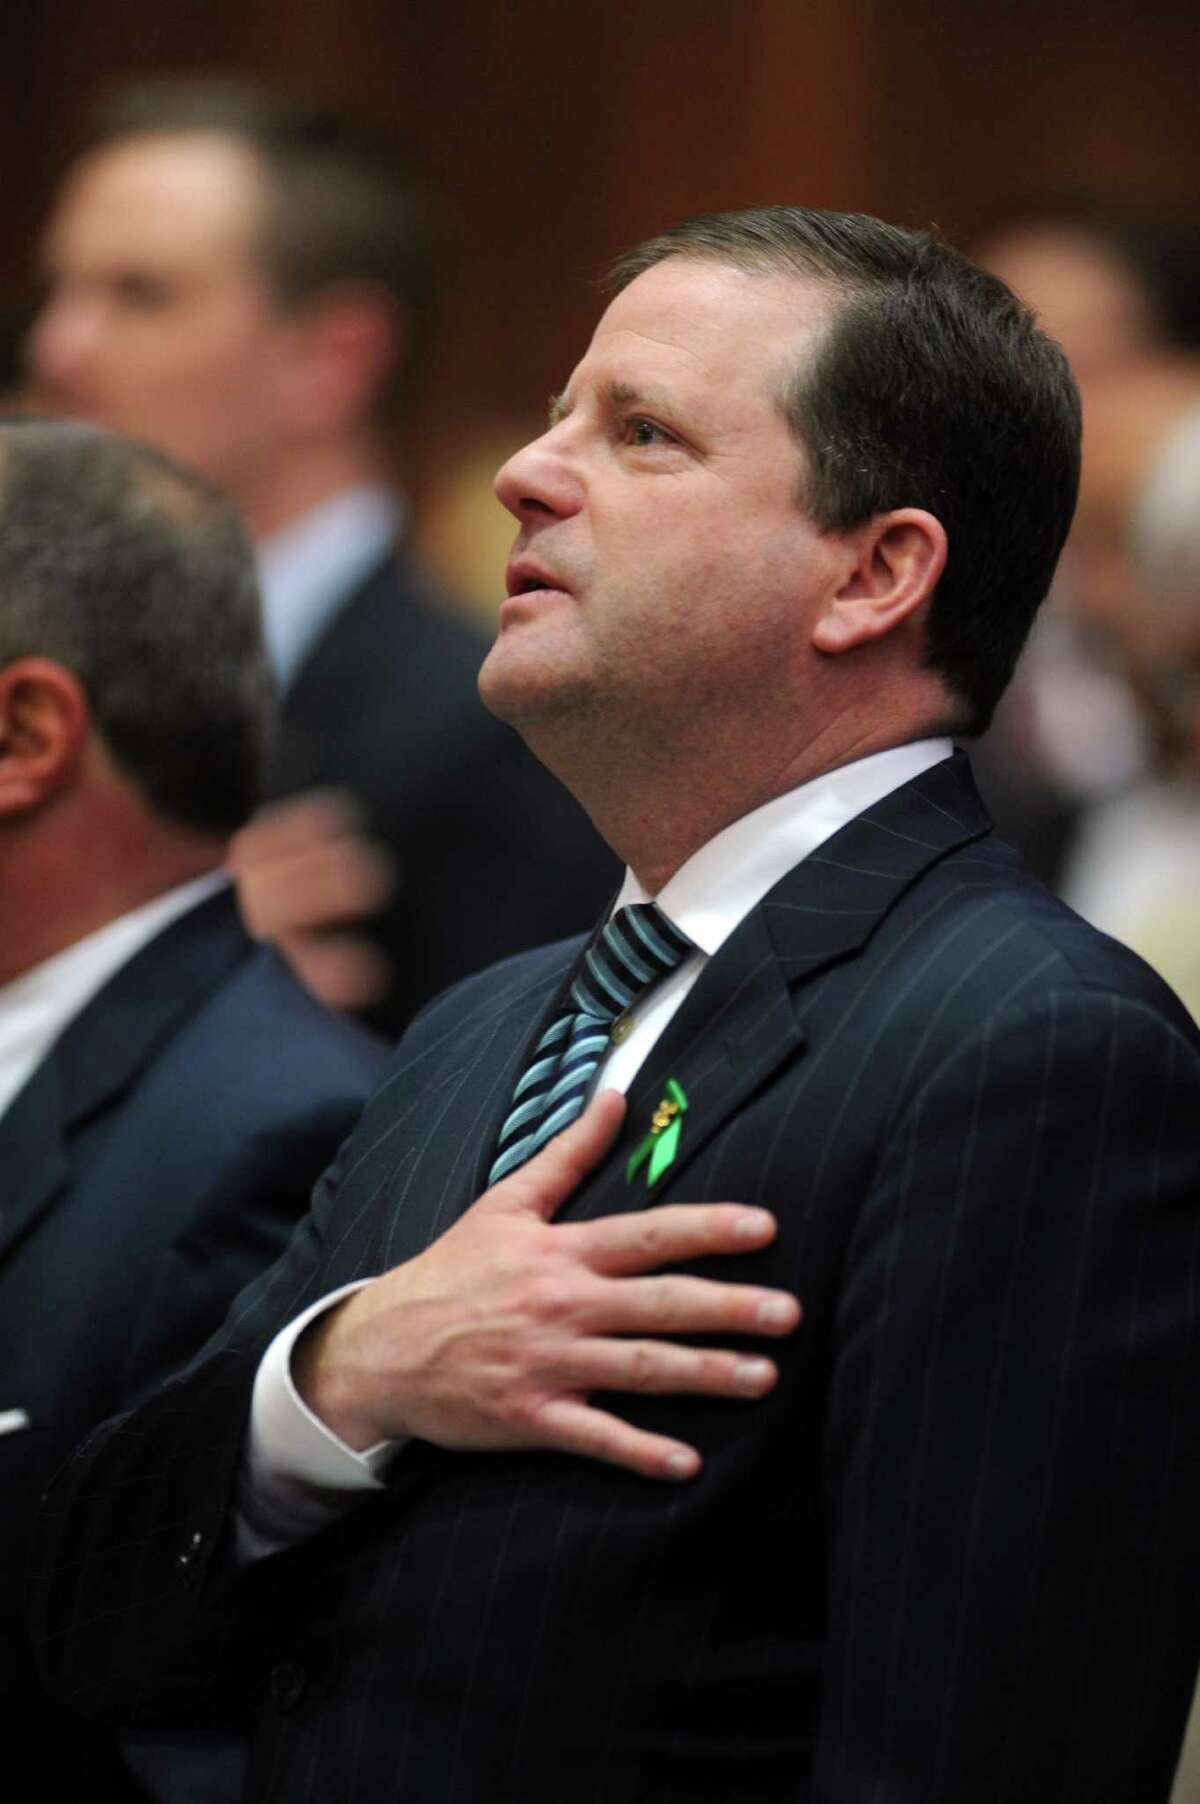 State Sen. John McKinney (R-Fairfield) stands for the Pledge of Allegiance Wednesday, Jan. 9, 2013 during opening day of the State Legislature at the Capitol Building in Hartford, Conn.